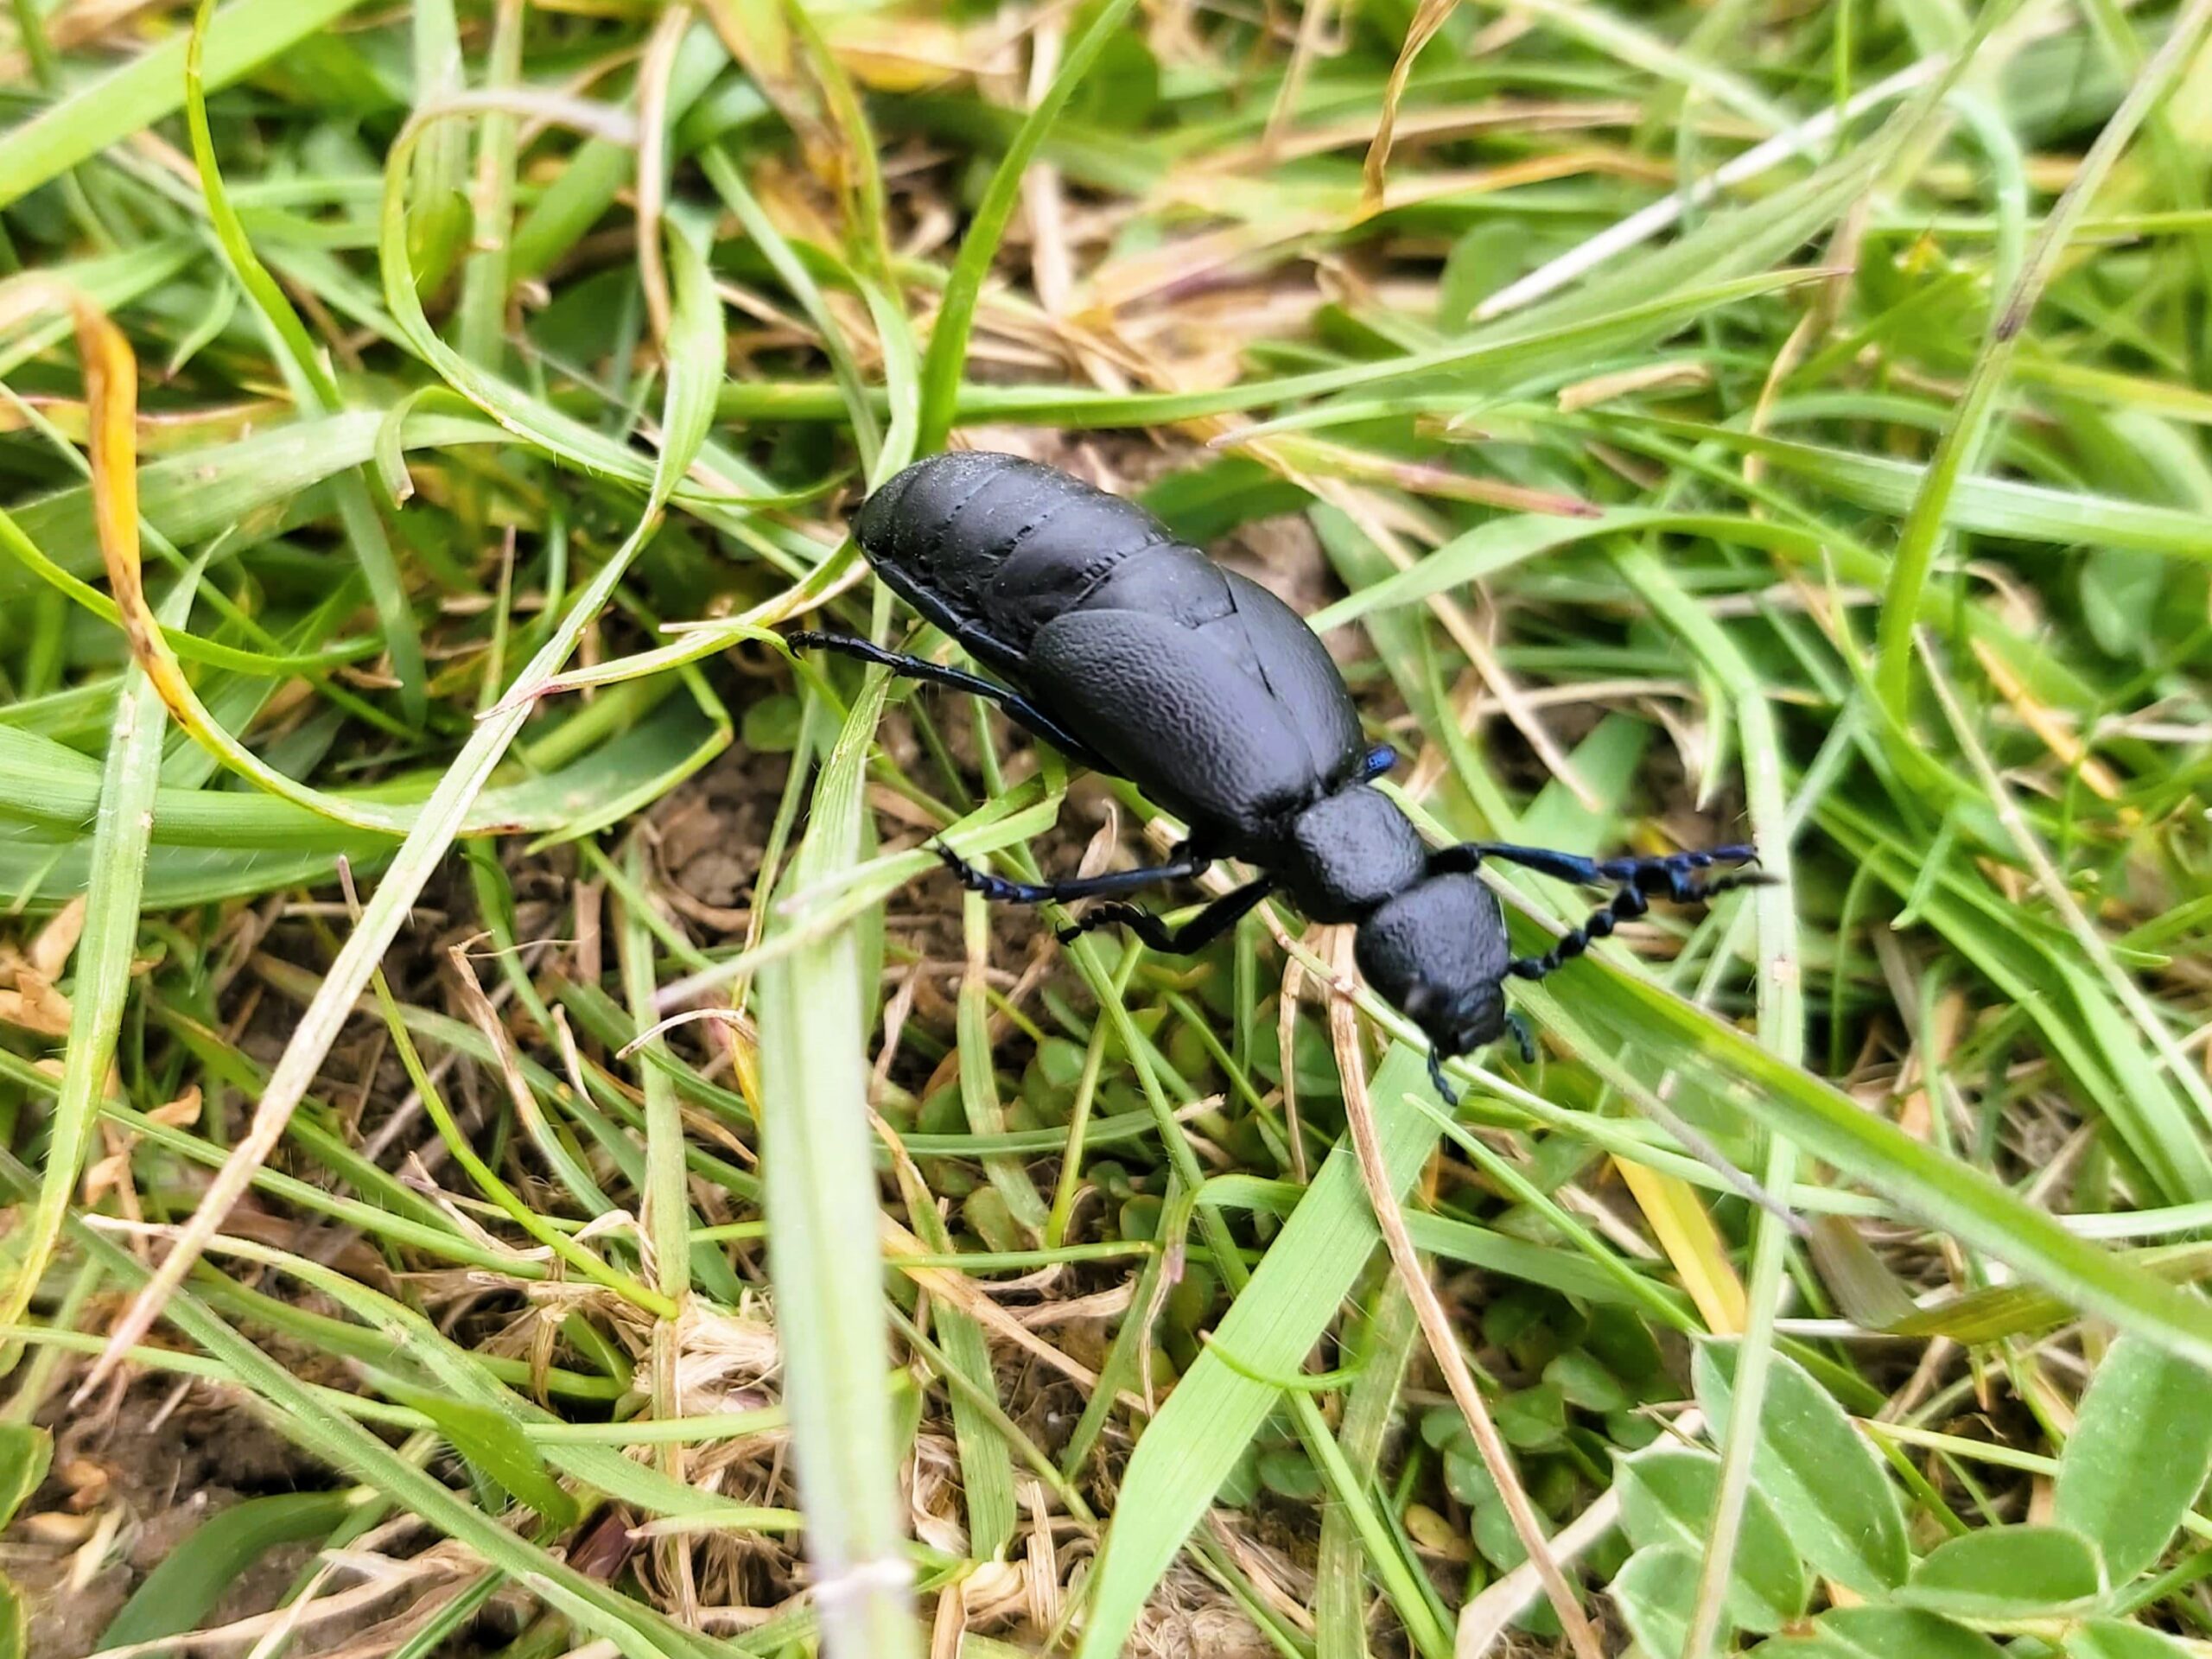 A beetle found near The Cuckoo Stone, a Neolithic or Bronze Age standing stone near Woodhenge, England